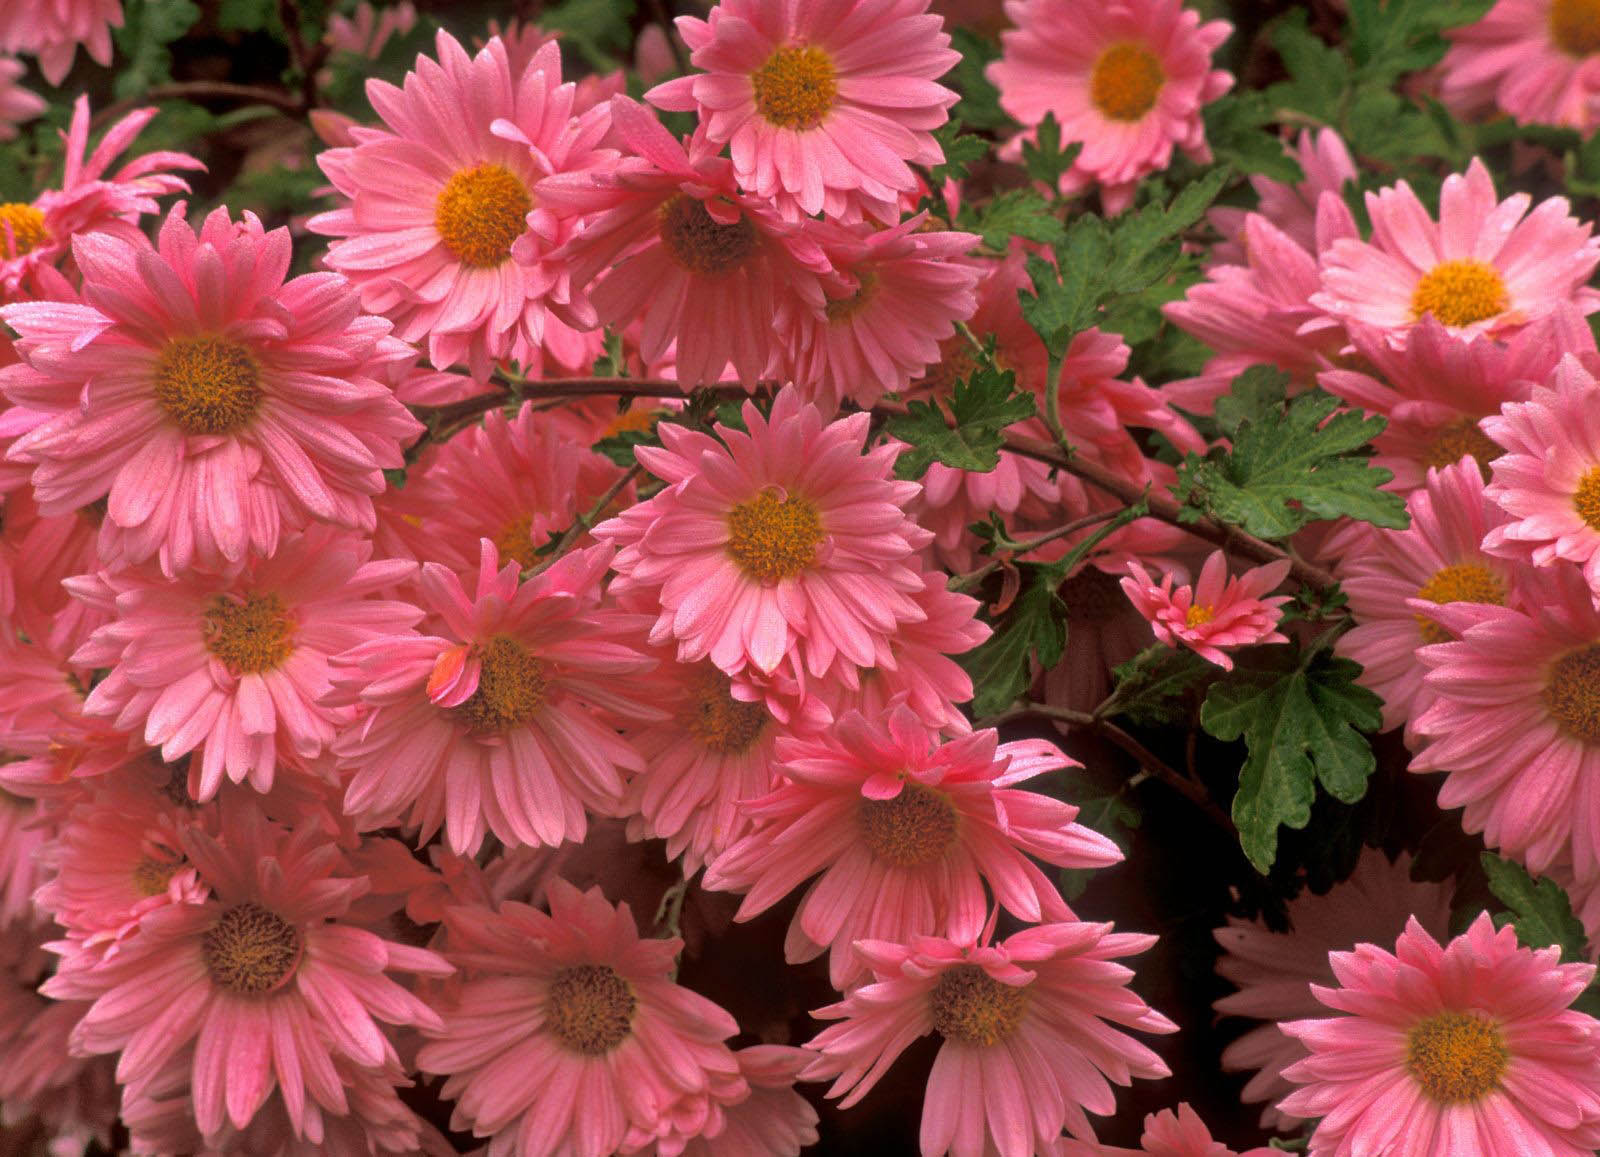 Pink Daisy Background Images amp Pictures   Becuo